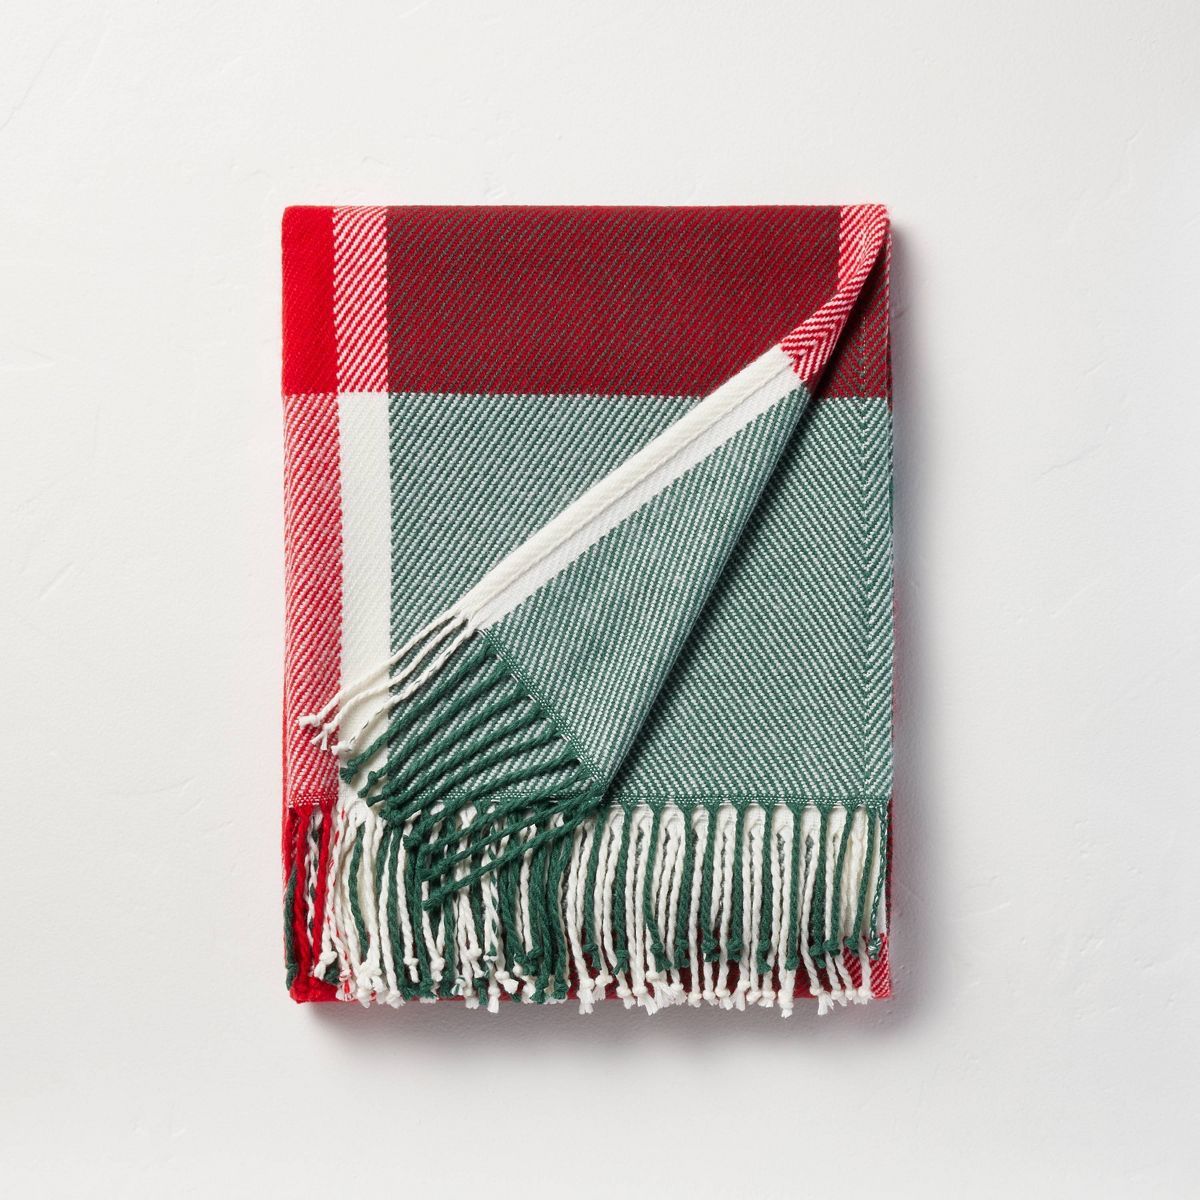 Festive Plaid Woven Christmas Throw Blanket Red/Green/Cream - Hearth & Hand™ with Magnolia | Target